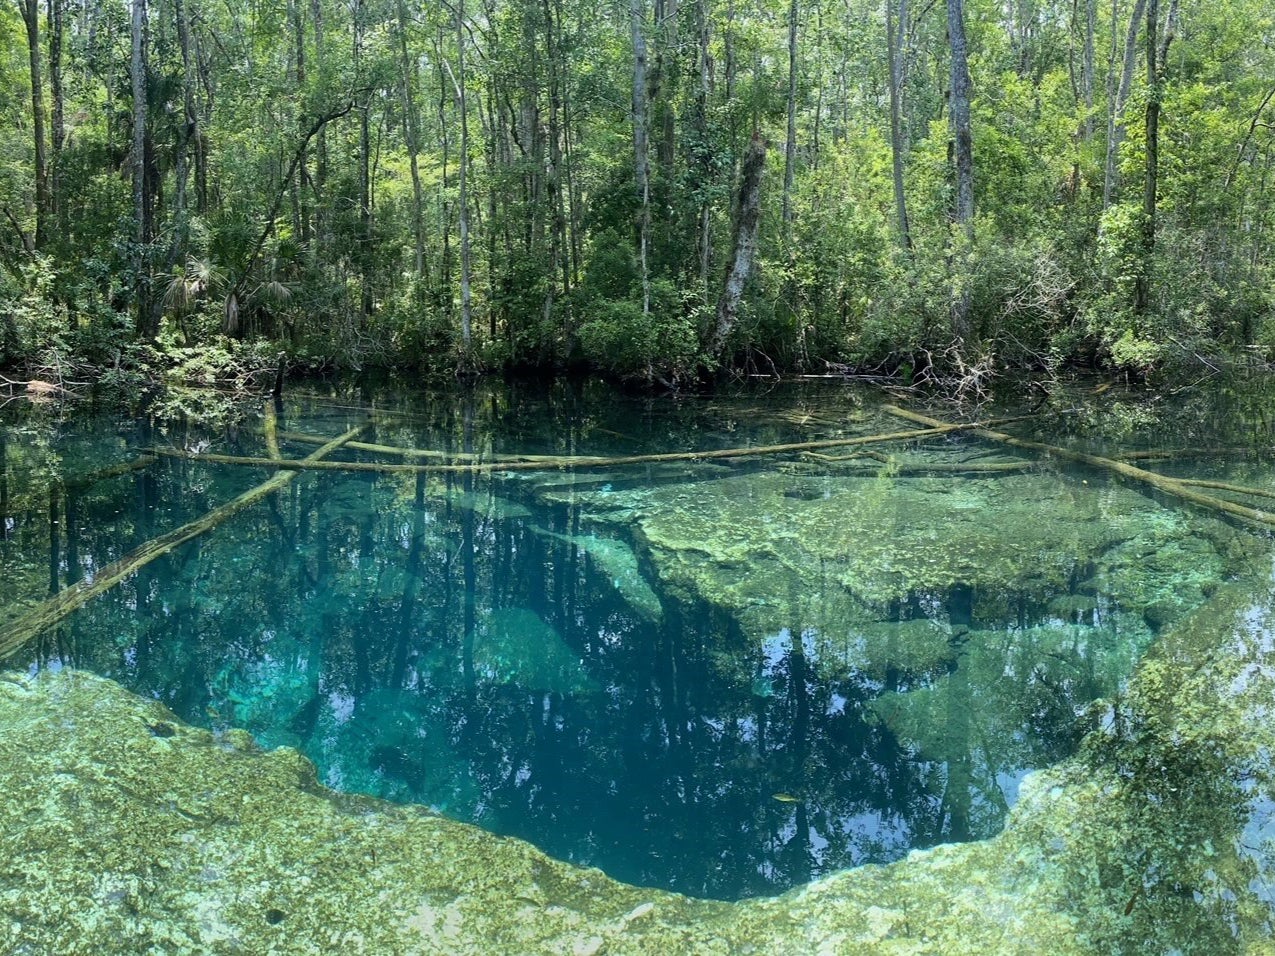 The lake in Chassahowitzka Wildlife Park, Florida, where the divers were found